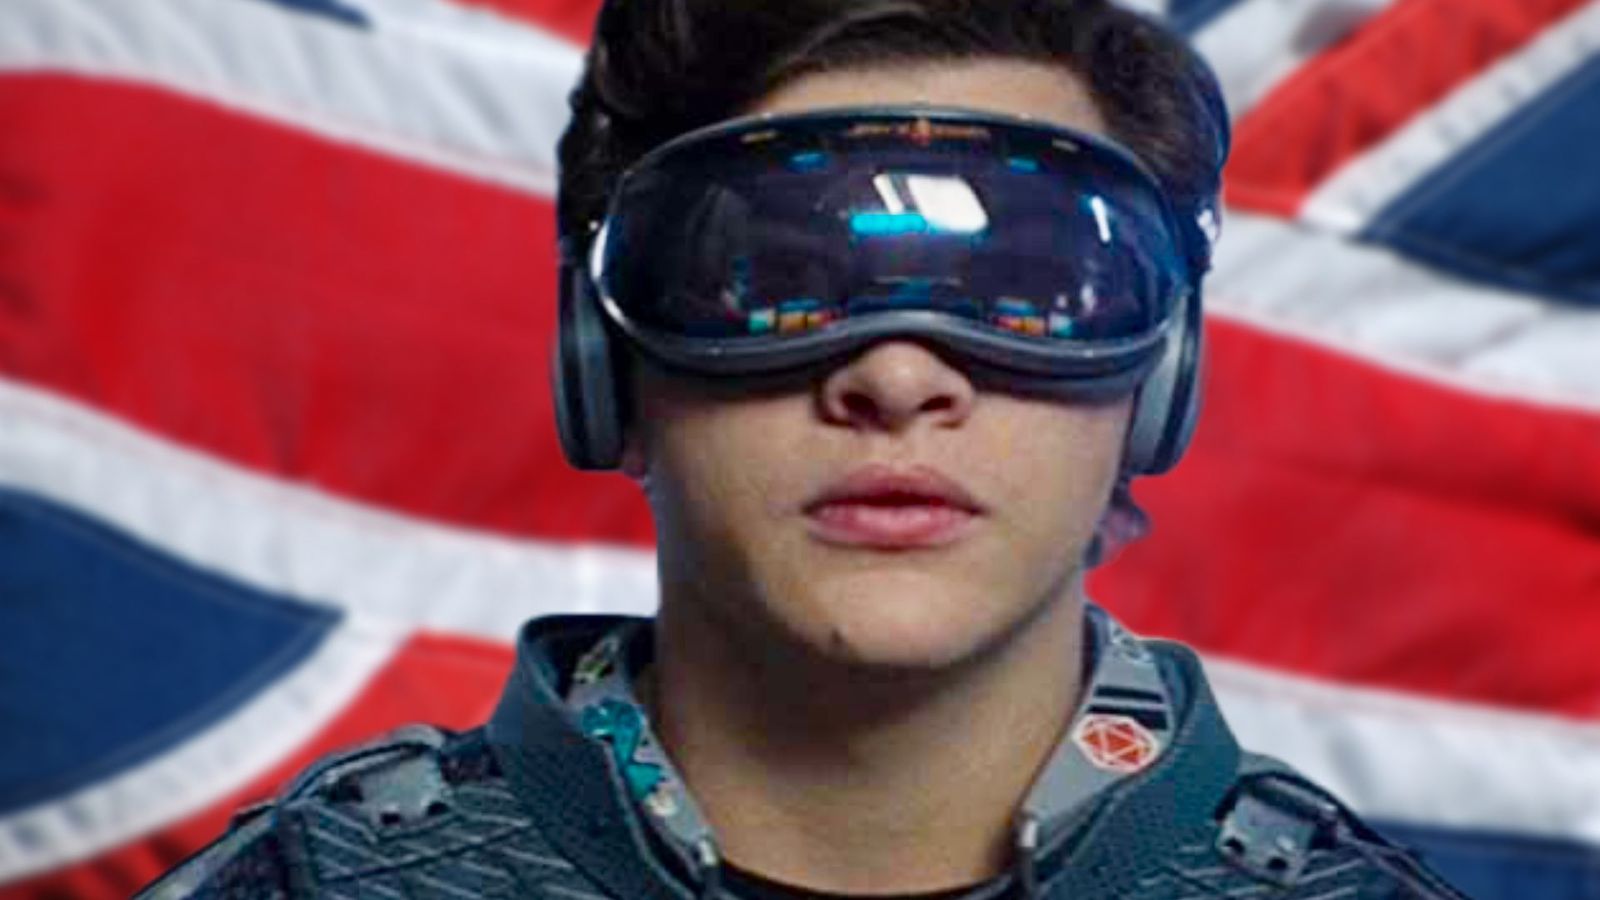 British people Metaverse; the guy from ready player one on a British flag